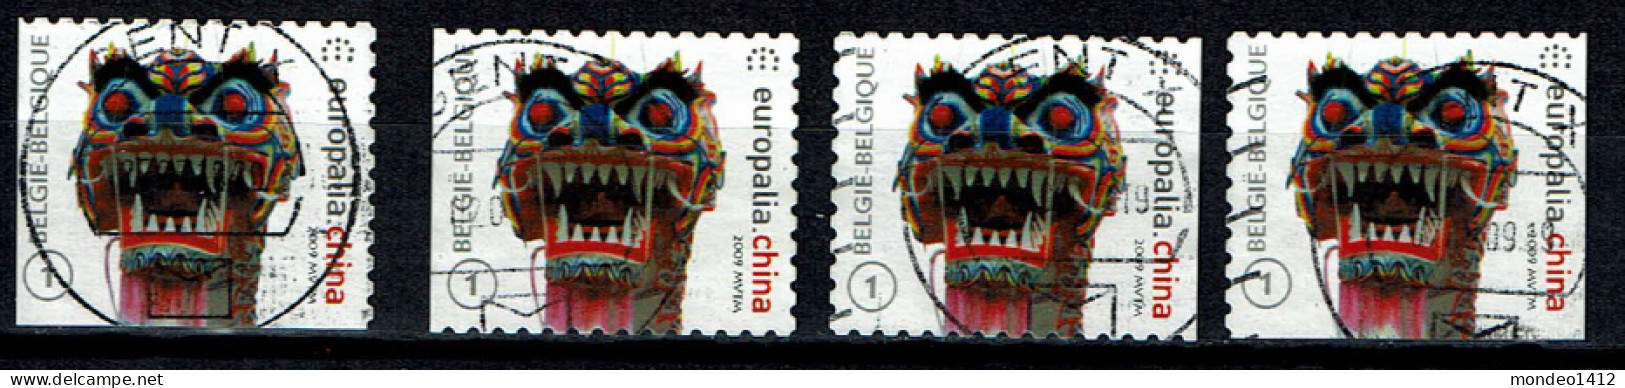 België OBP 3968 - Europalia 2009 - Self Adhesive Stamp From Booklet  Complete - Used Stamps